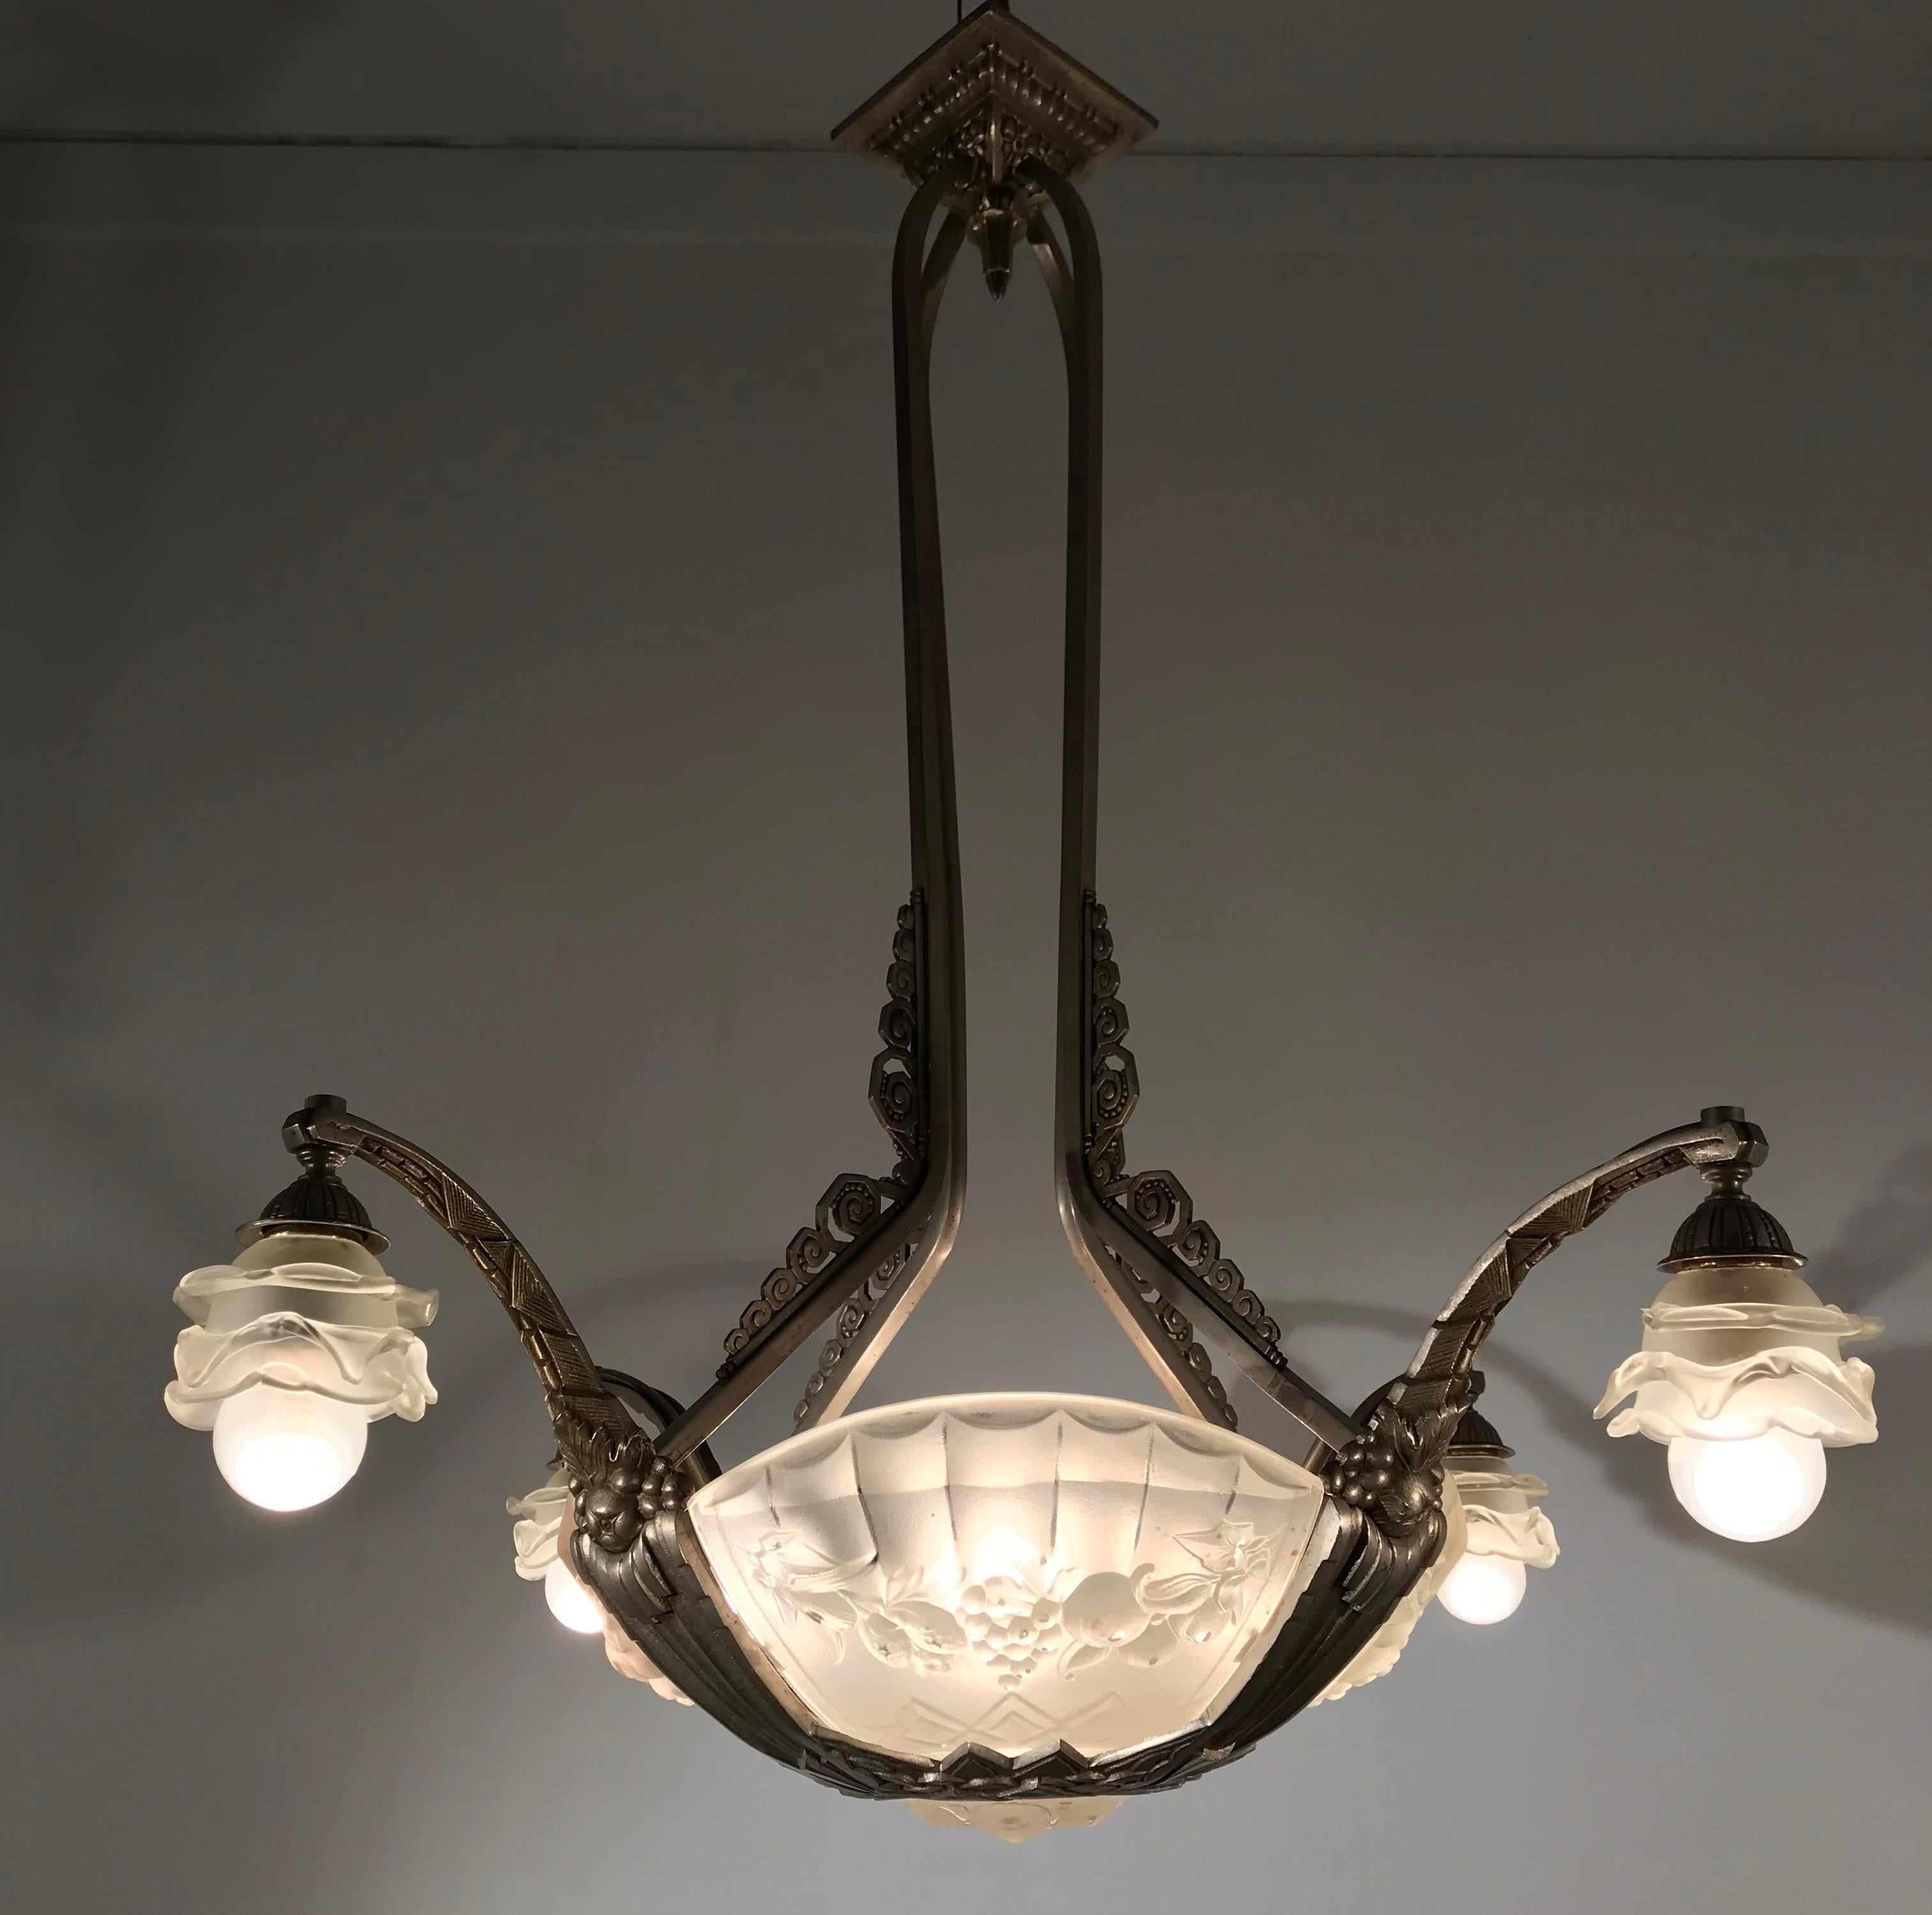 French Stunning 1930s Art Deco Glass and Bronze Pendant Chandelier by P. Gilles, France